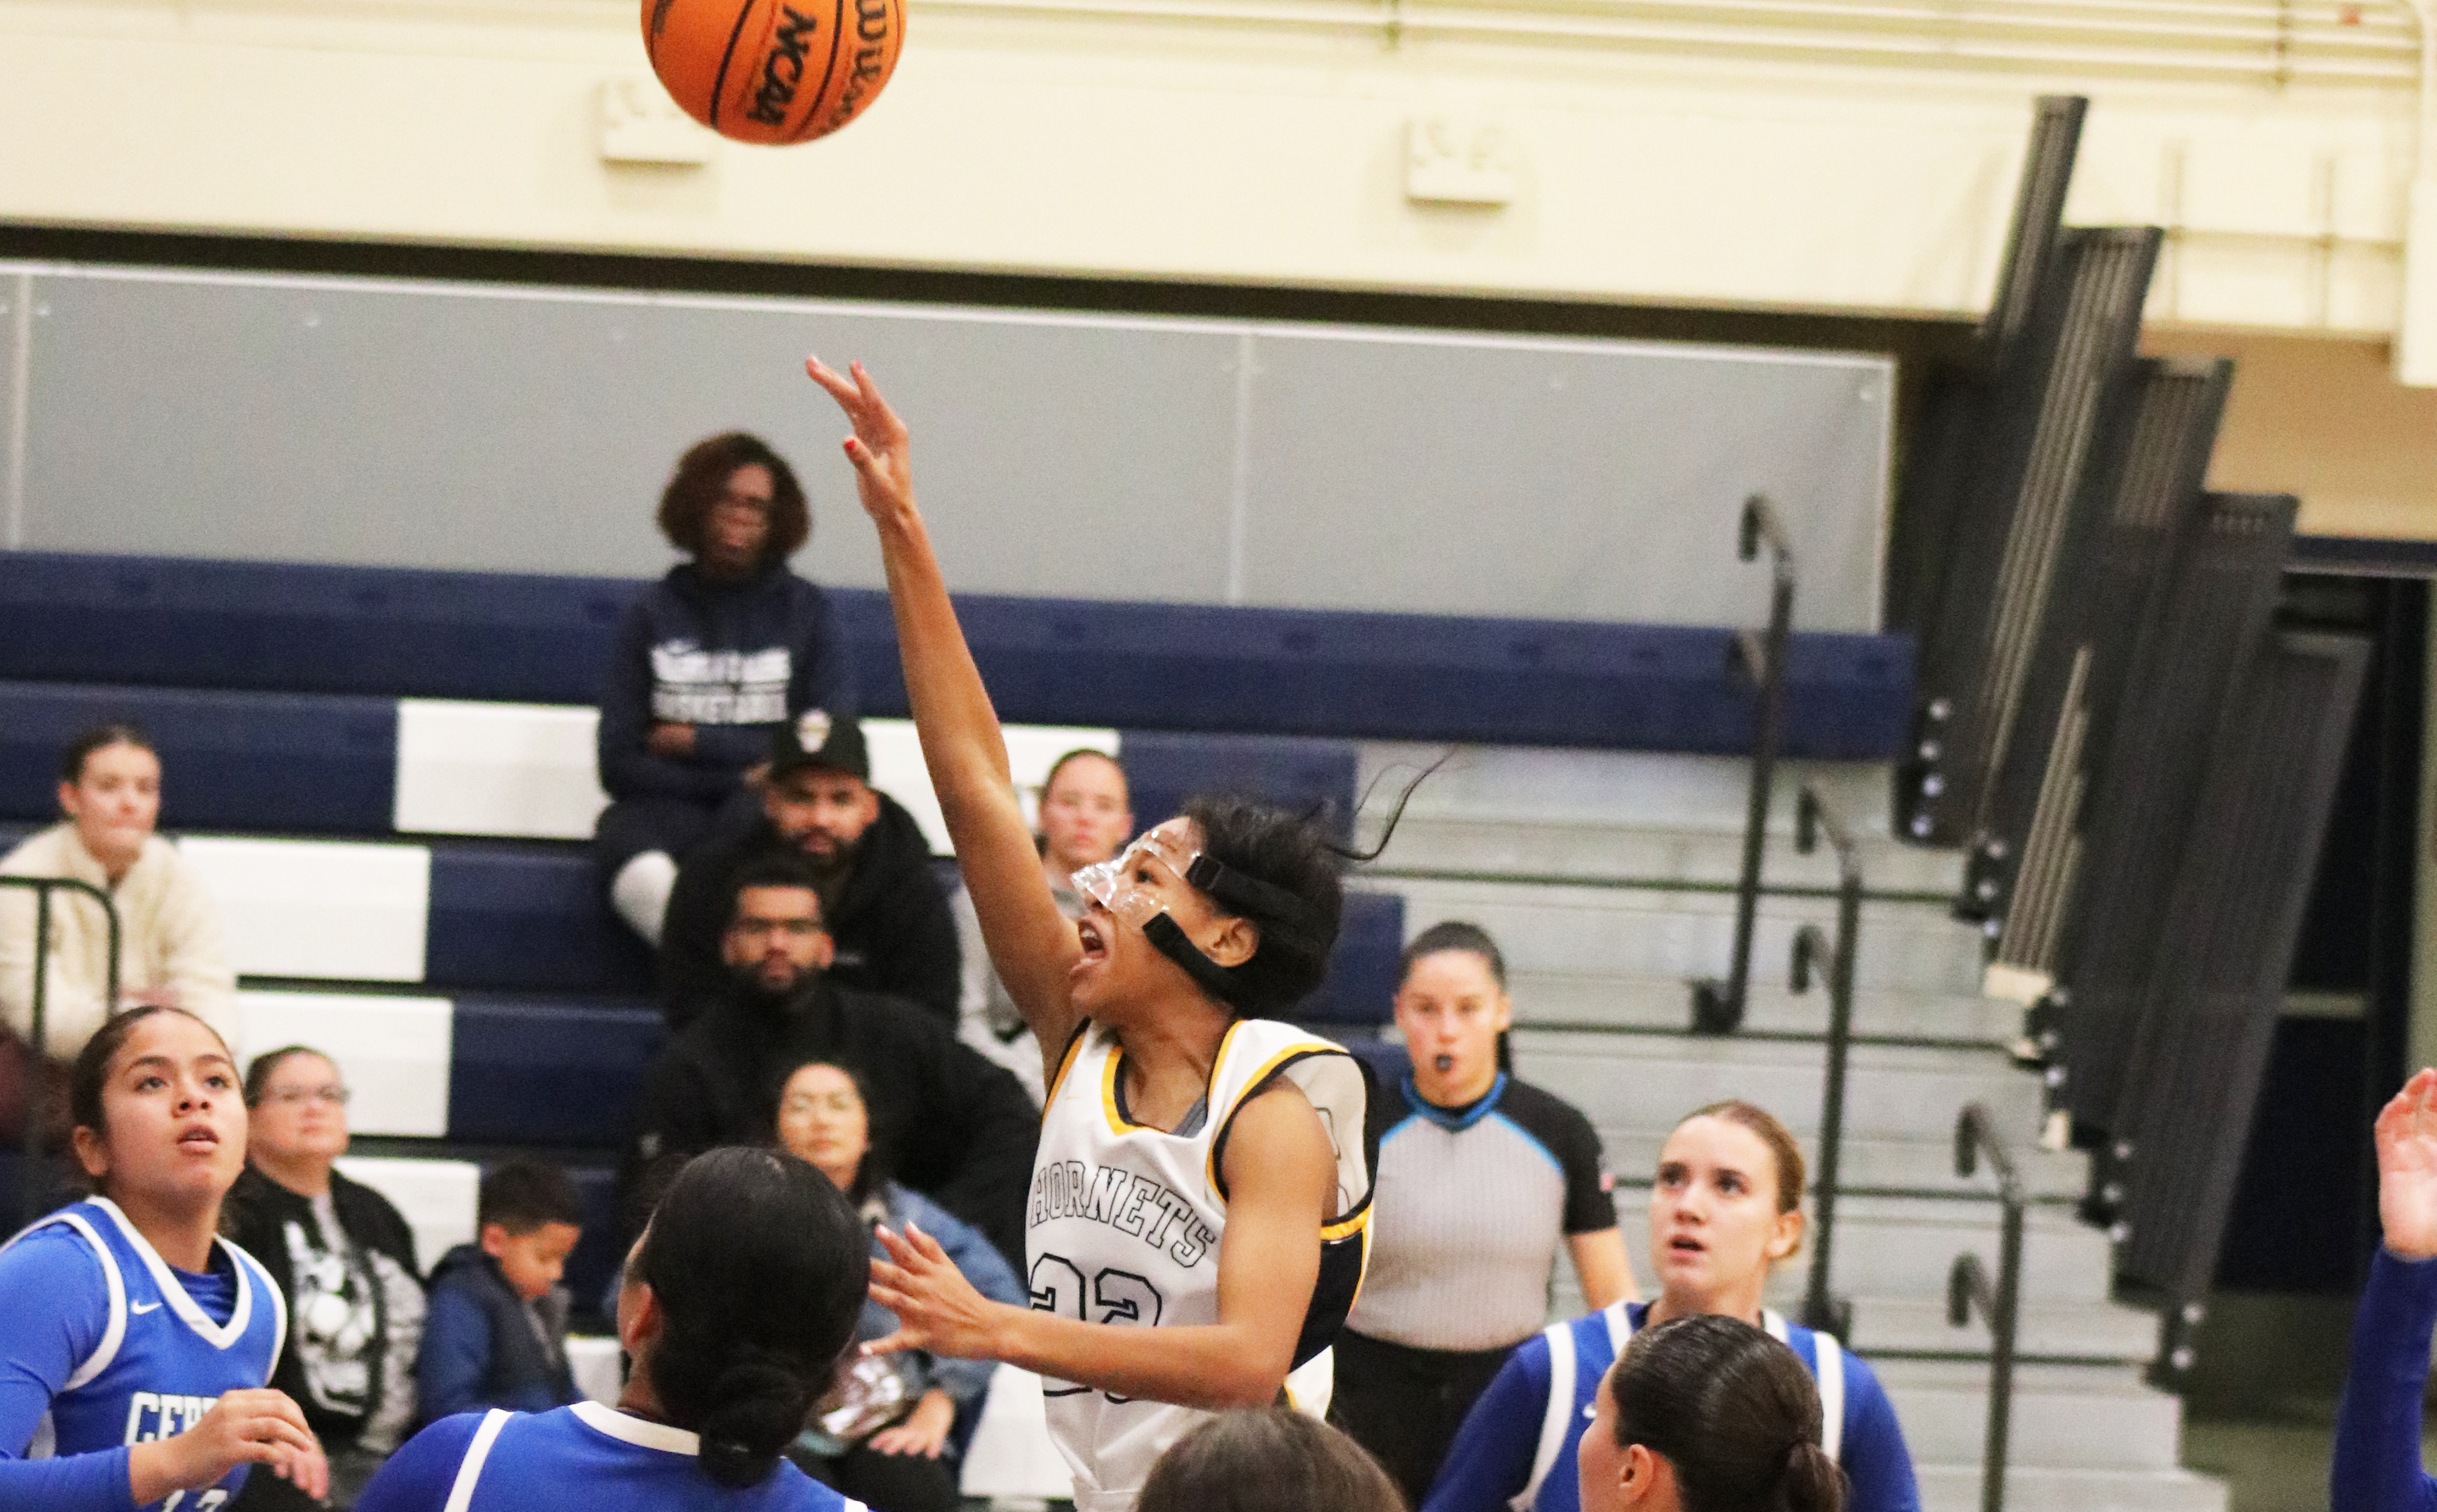 DAY THREE CR HOLIDAY CROSSOVER LANDS A VICTORY OVER CERRITOS